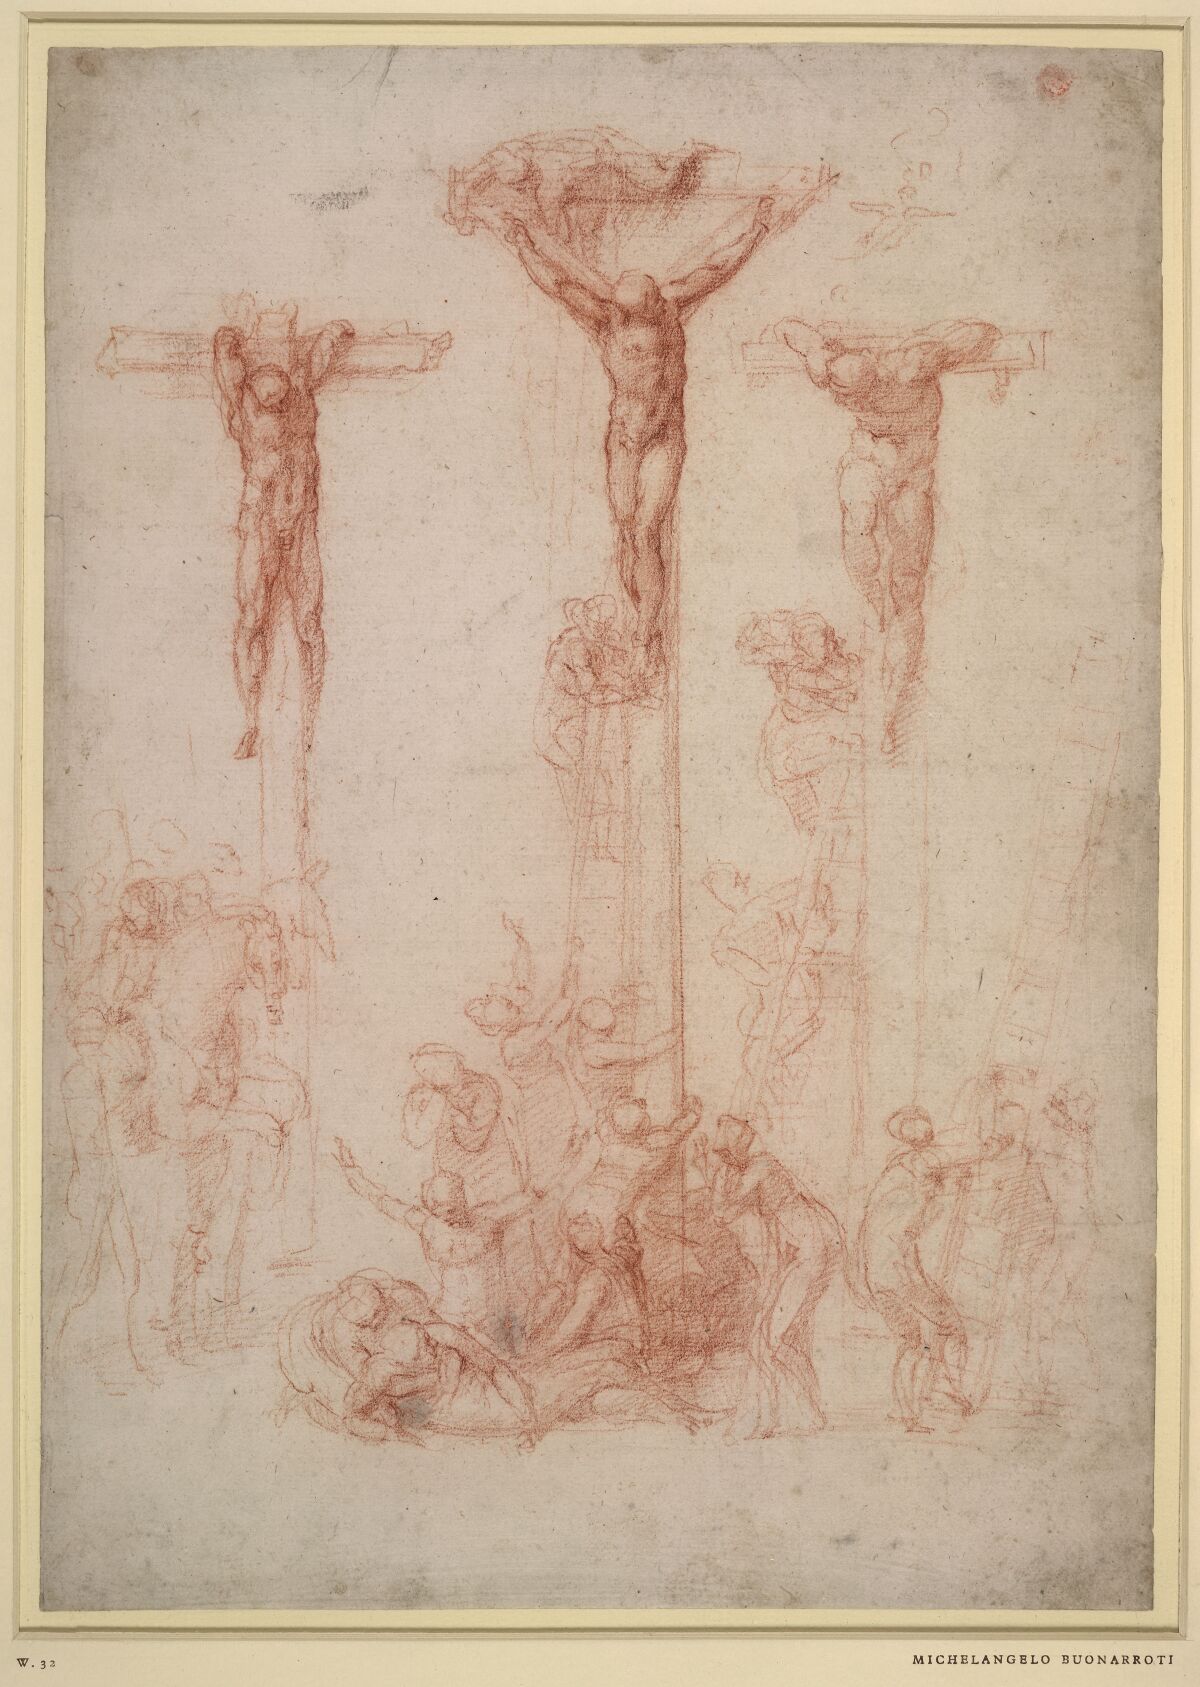 Michelangelo, The Three Crosses, c. 1520, red chalk and wash

